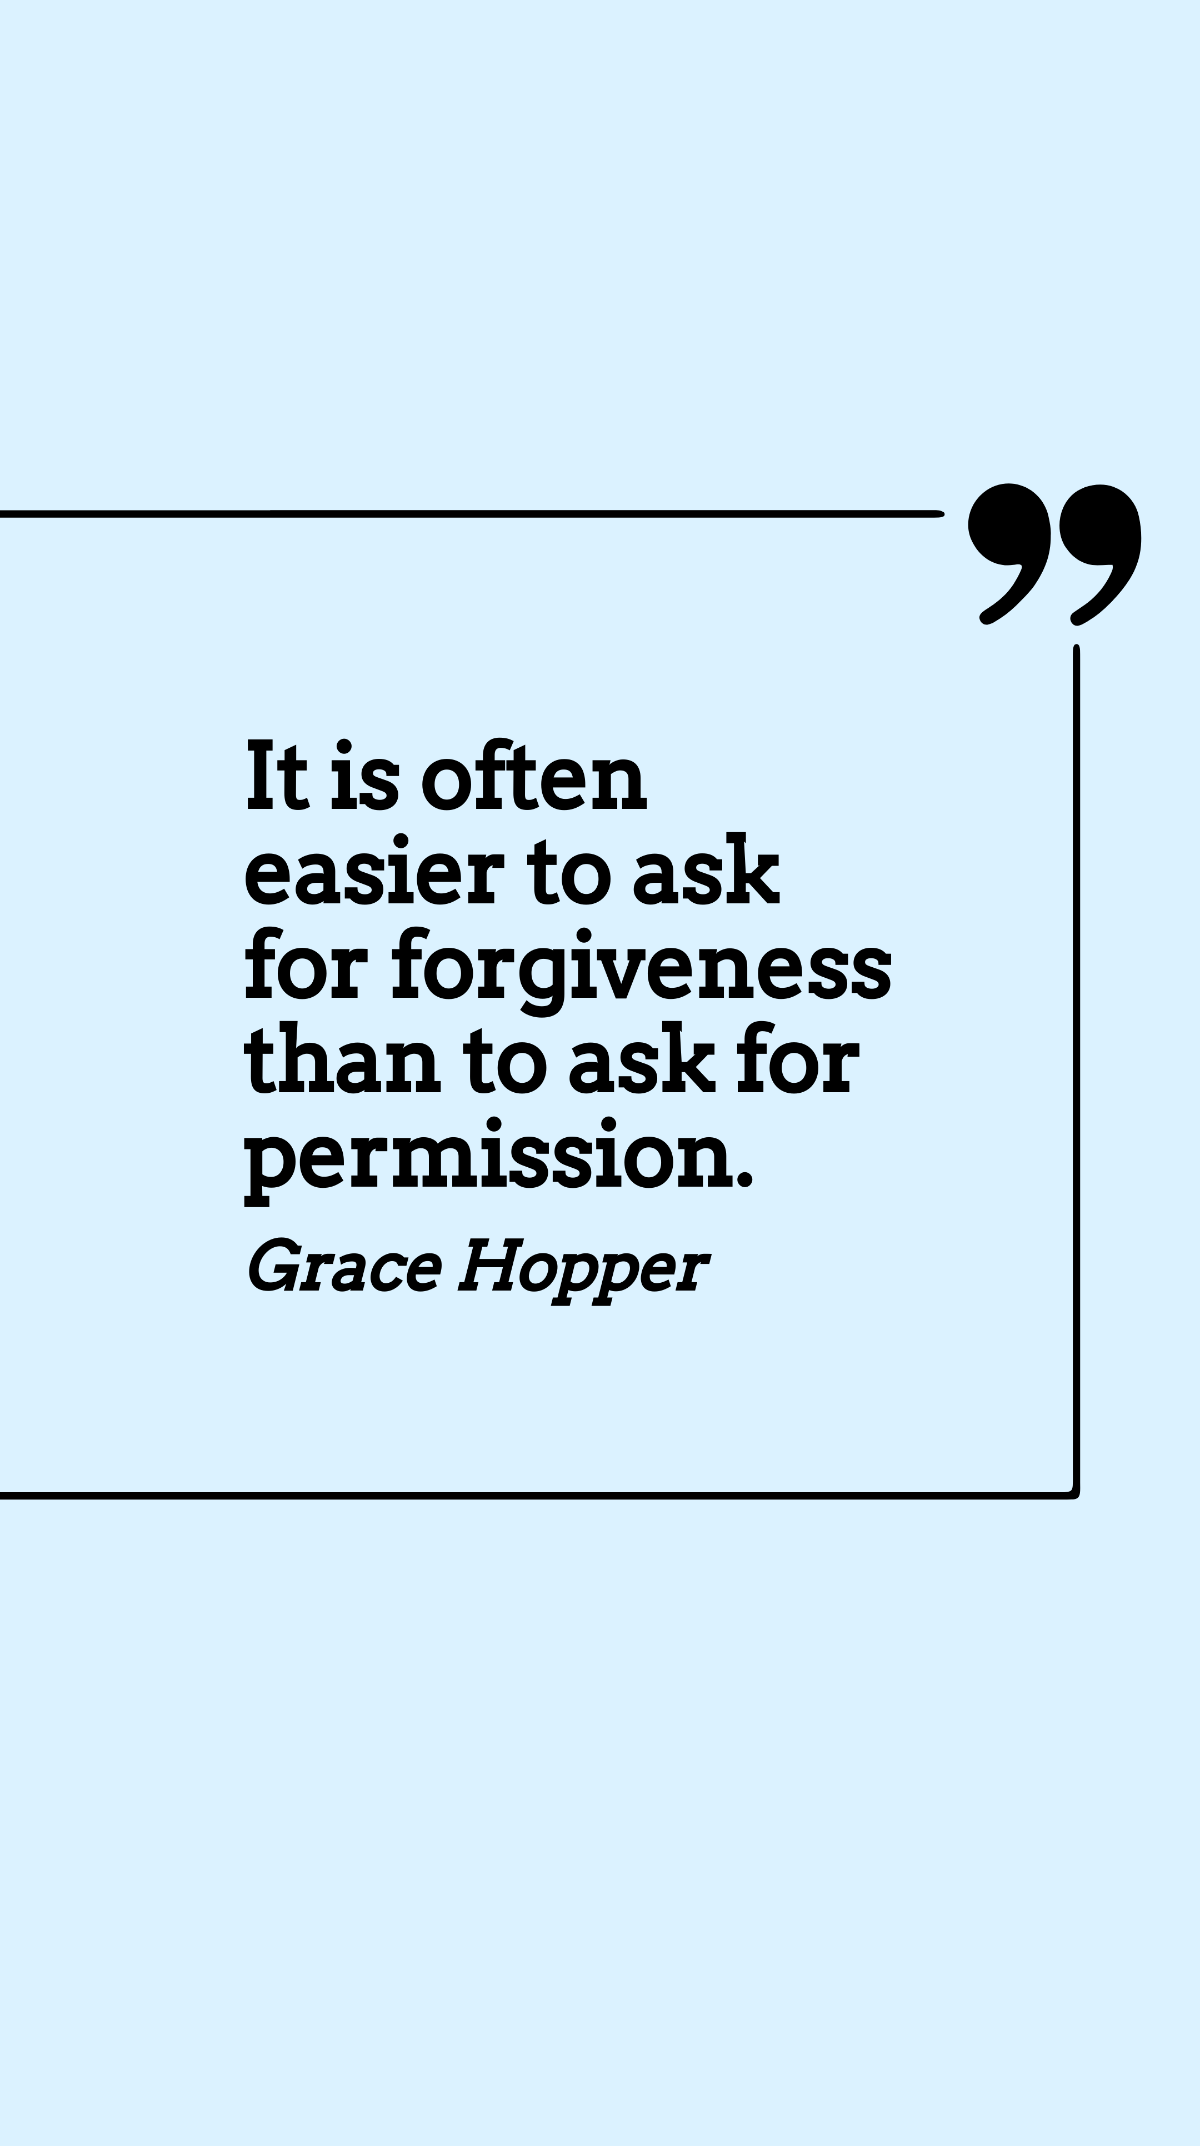 Grace Hopper - It is often easier to ask for forgiveness than to ask for permission. Template